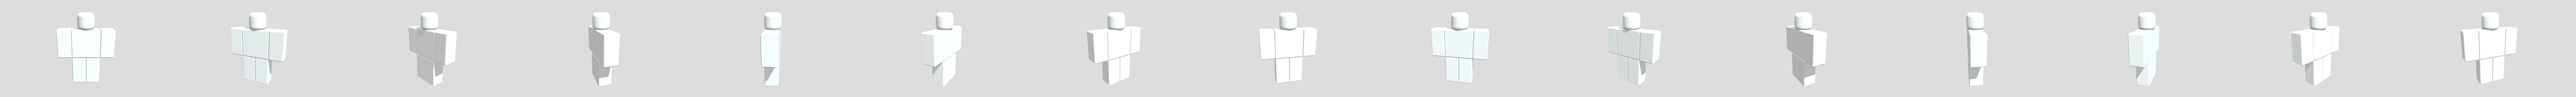 How To Make Classic Roblox Skin For Free